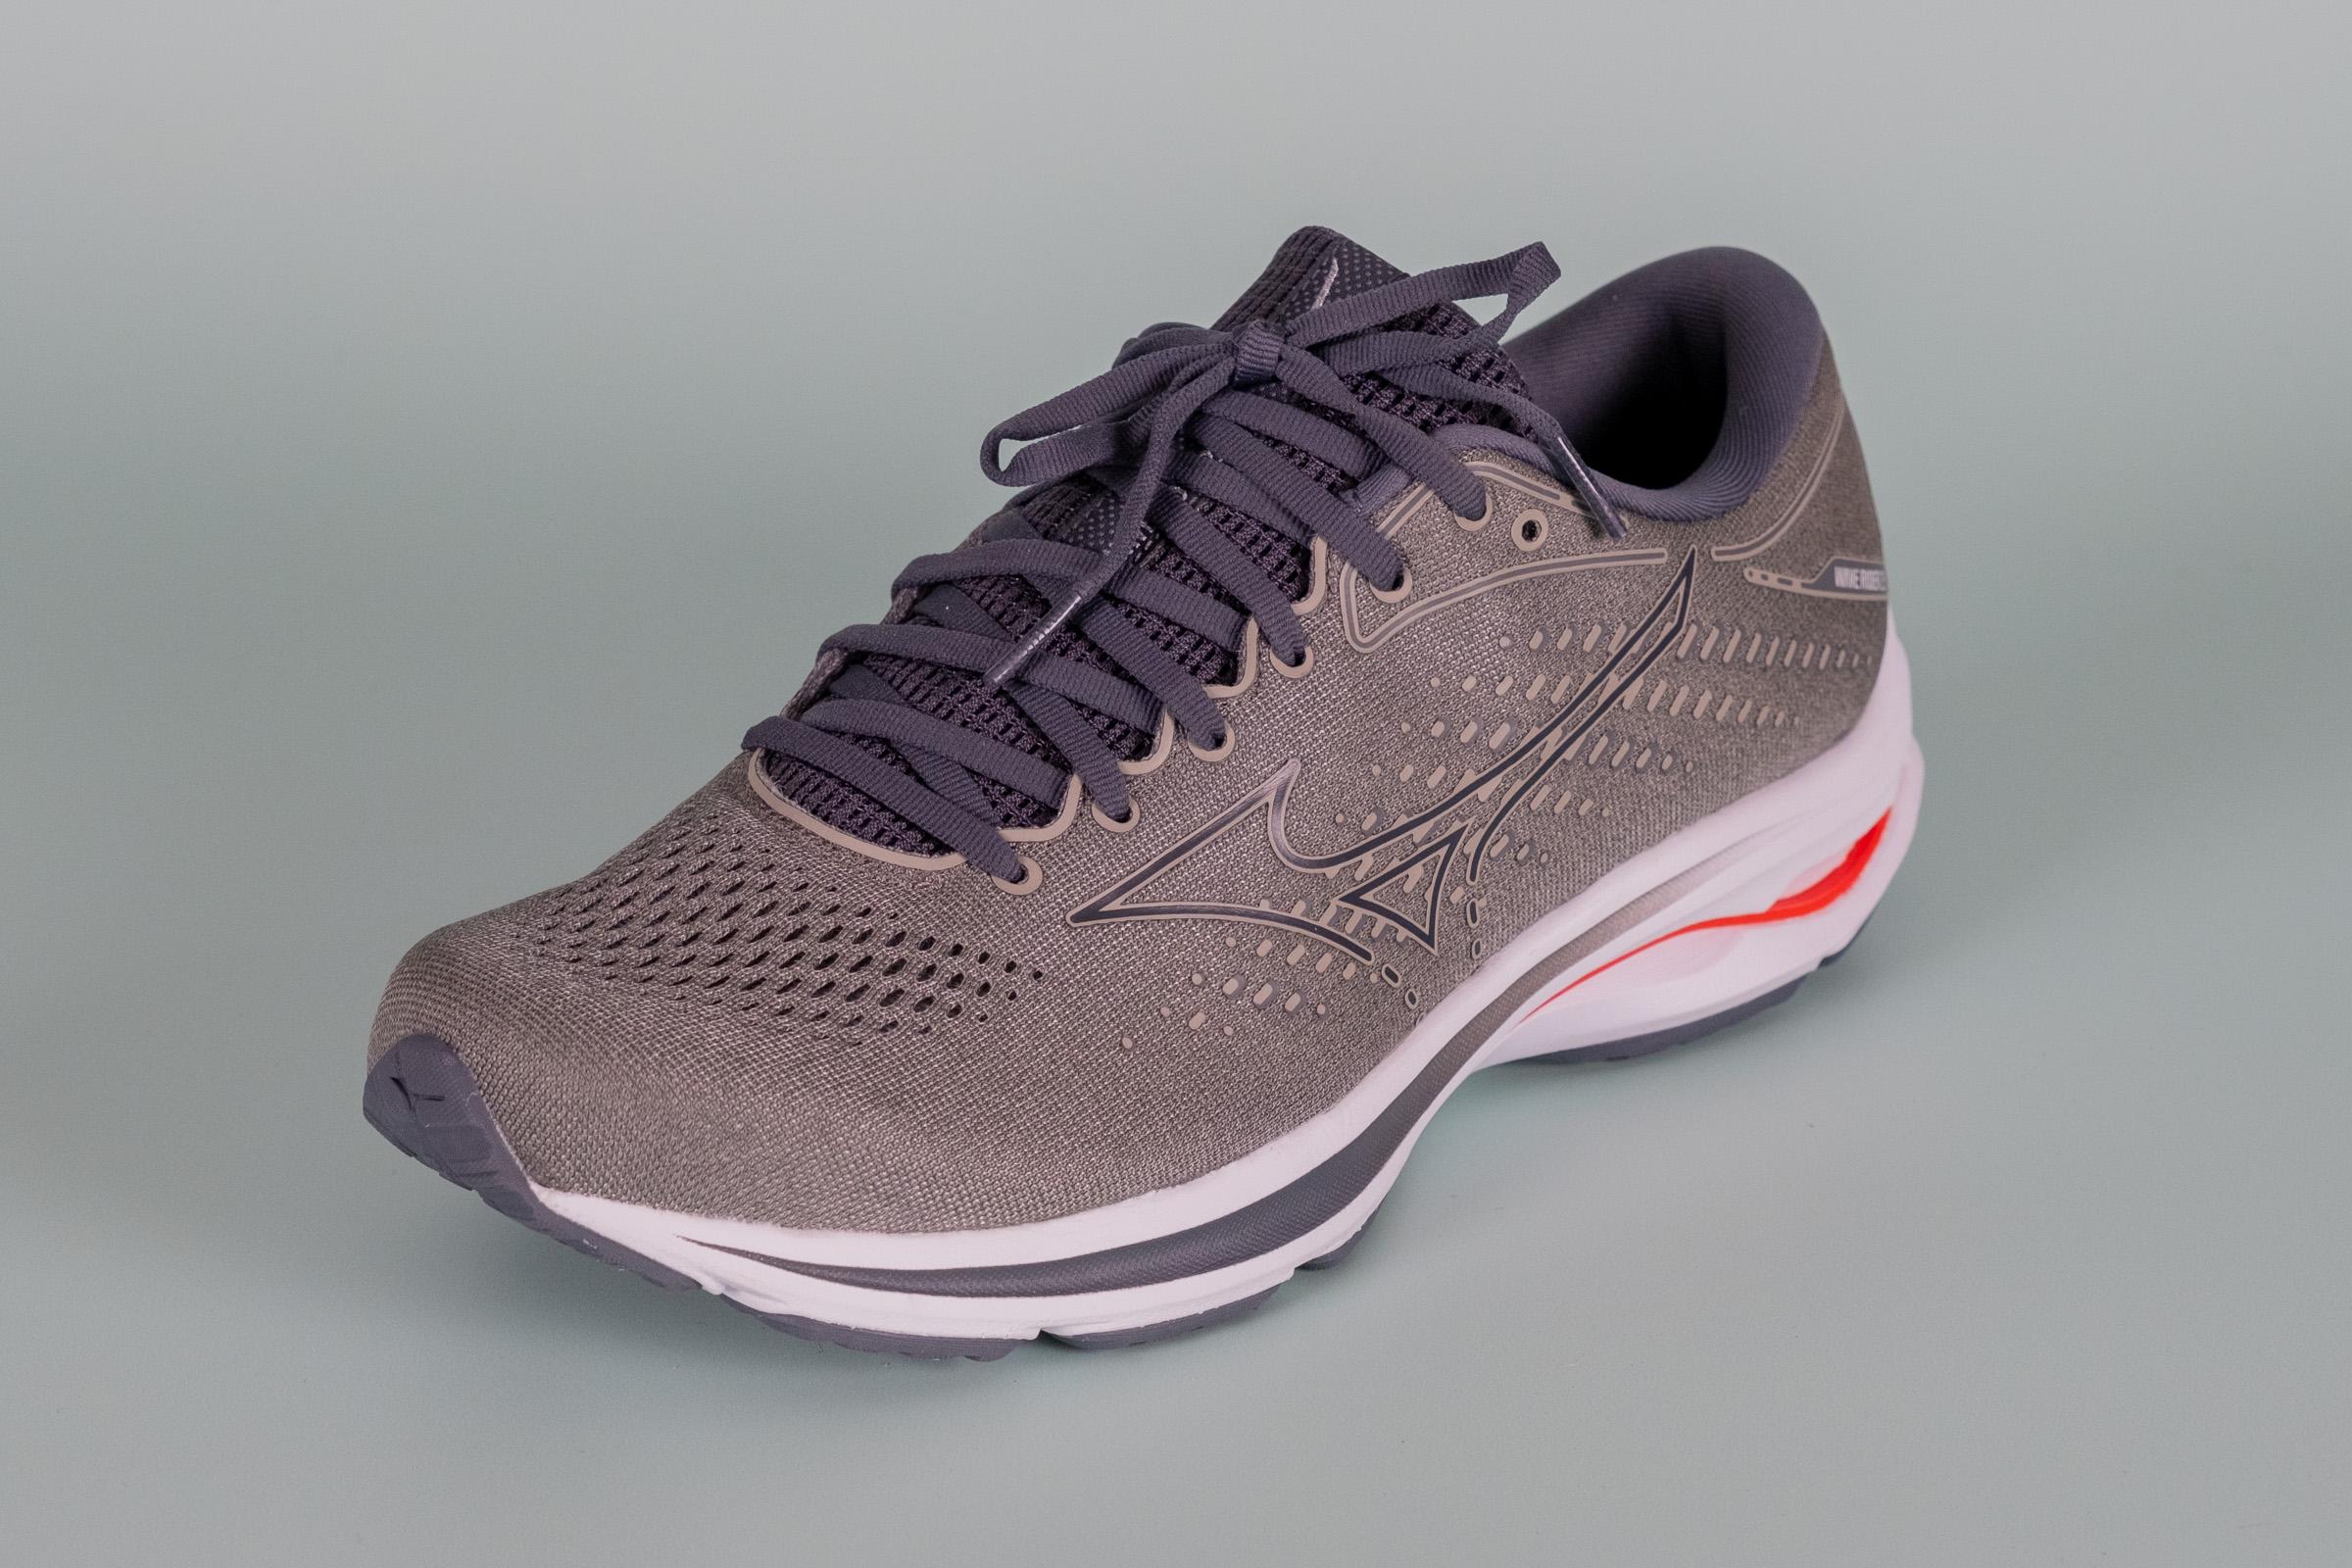 REVIEW: Mizuno Wave Rider 25 - Running shoe - Read here! [VIDEO] -  Inspiration